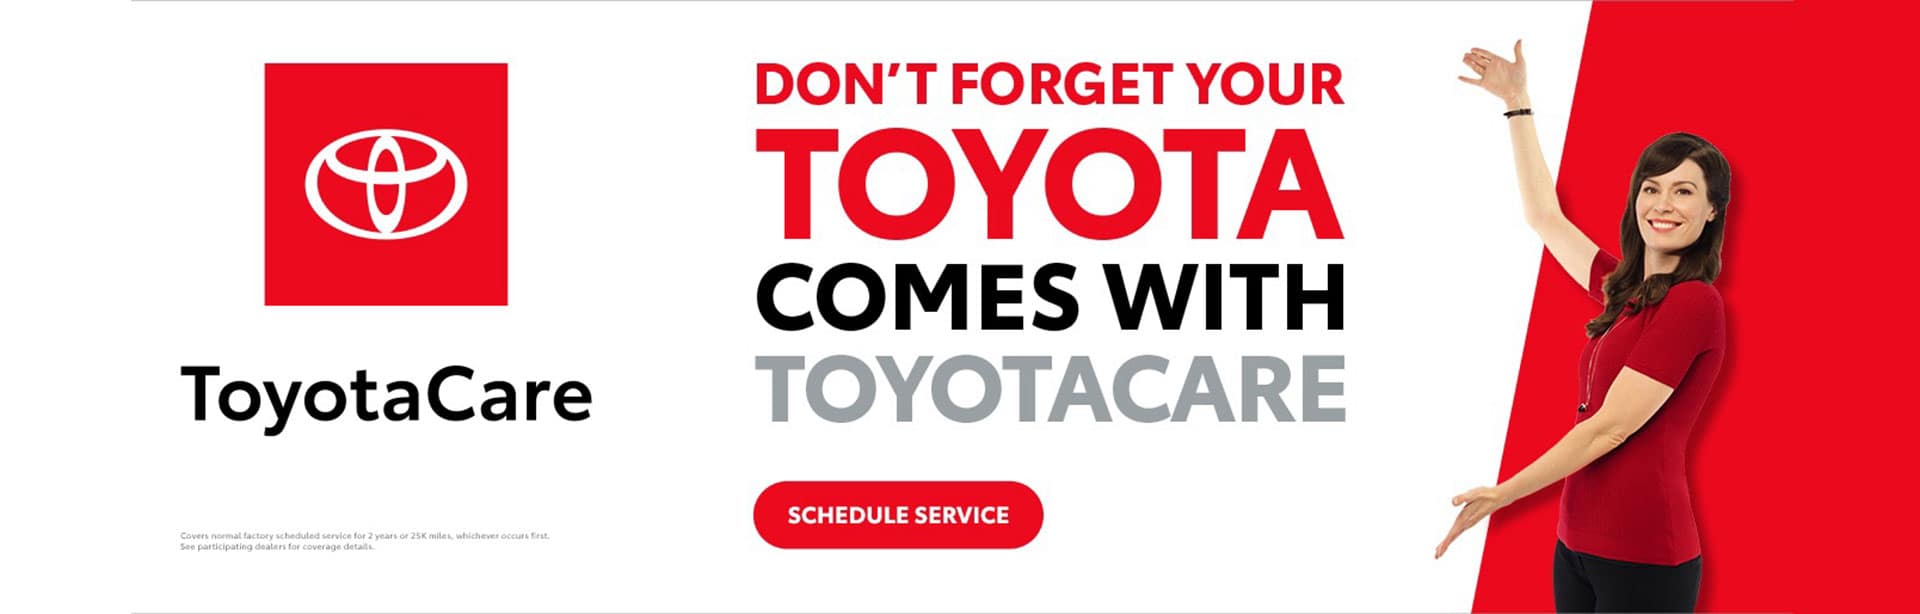 Don't forget your Toyota comes with ToyotaCare